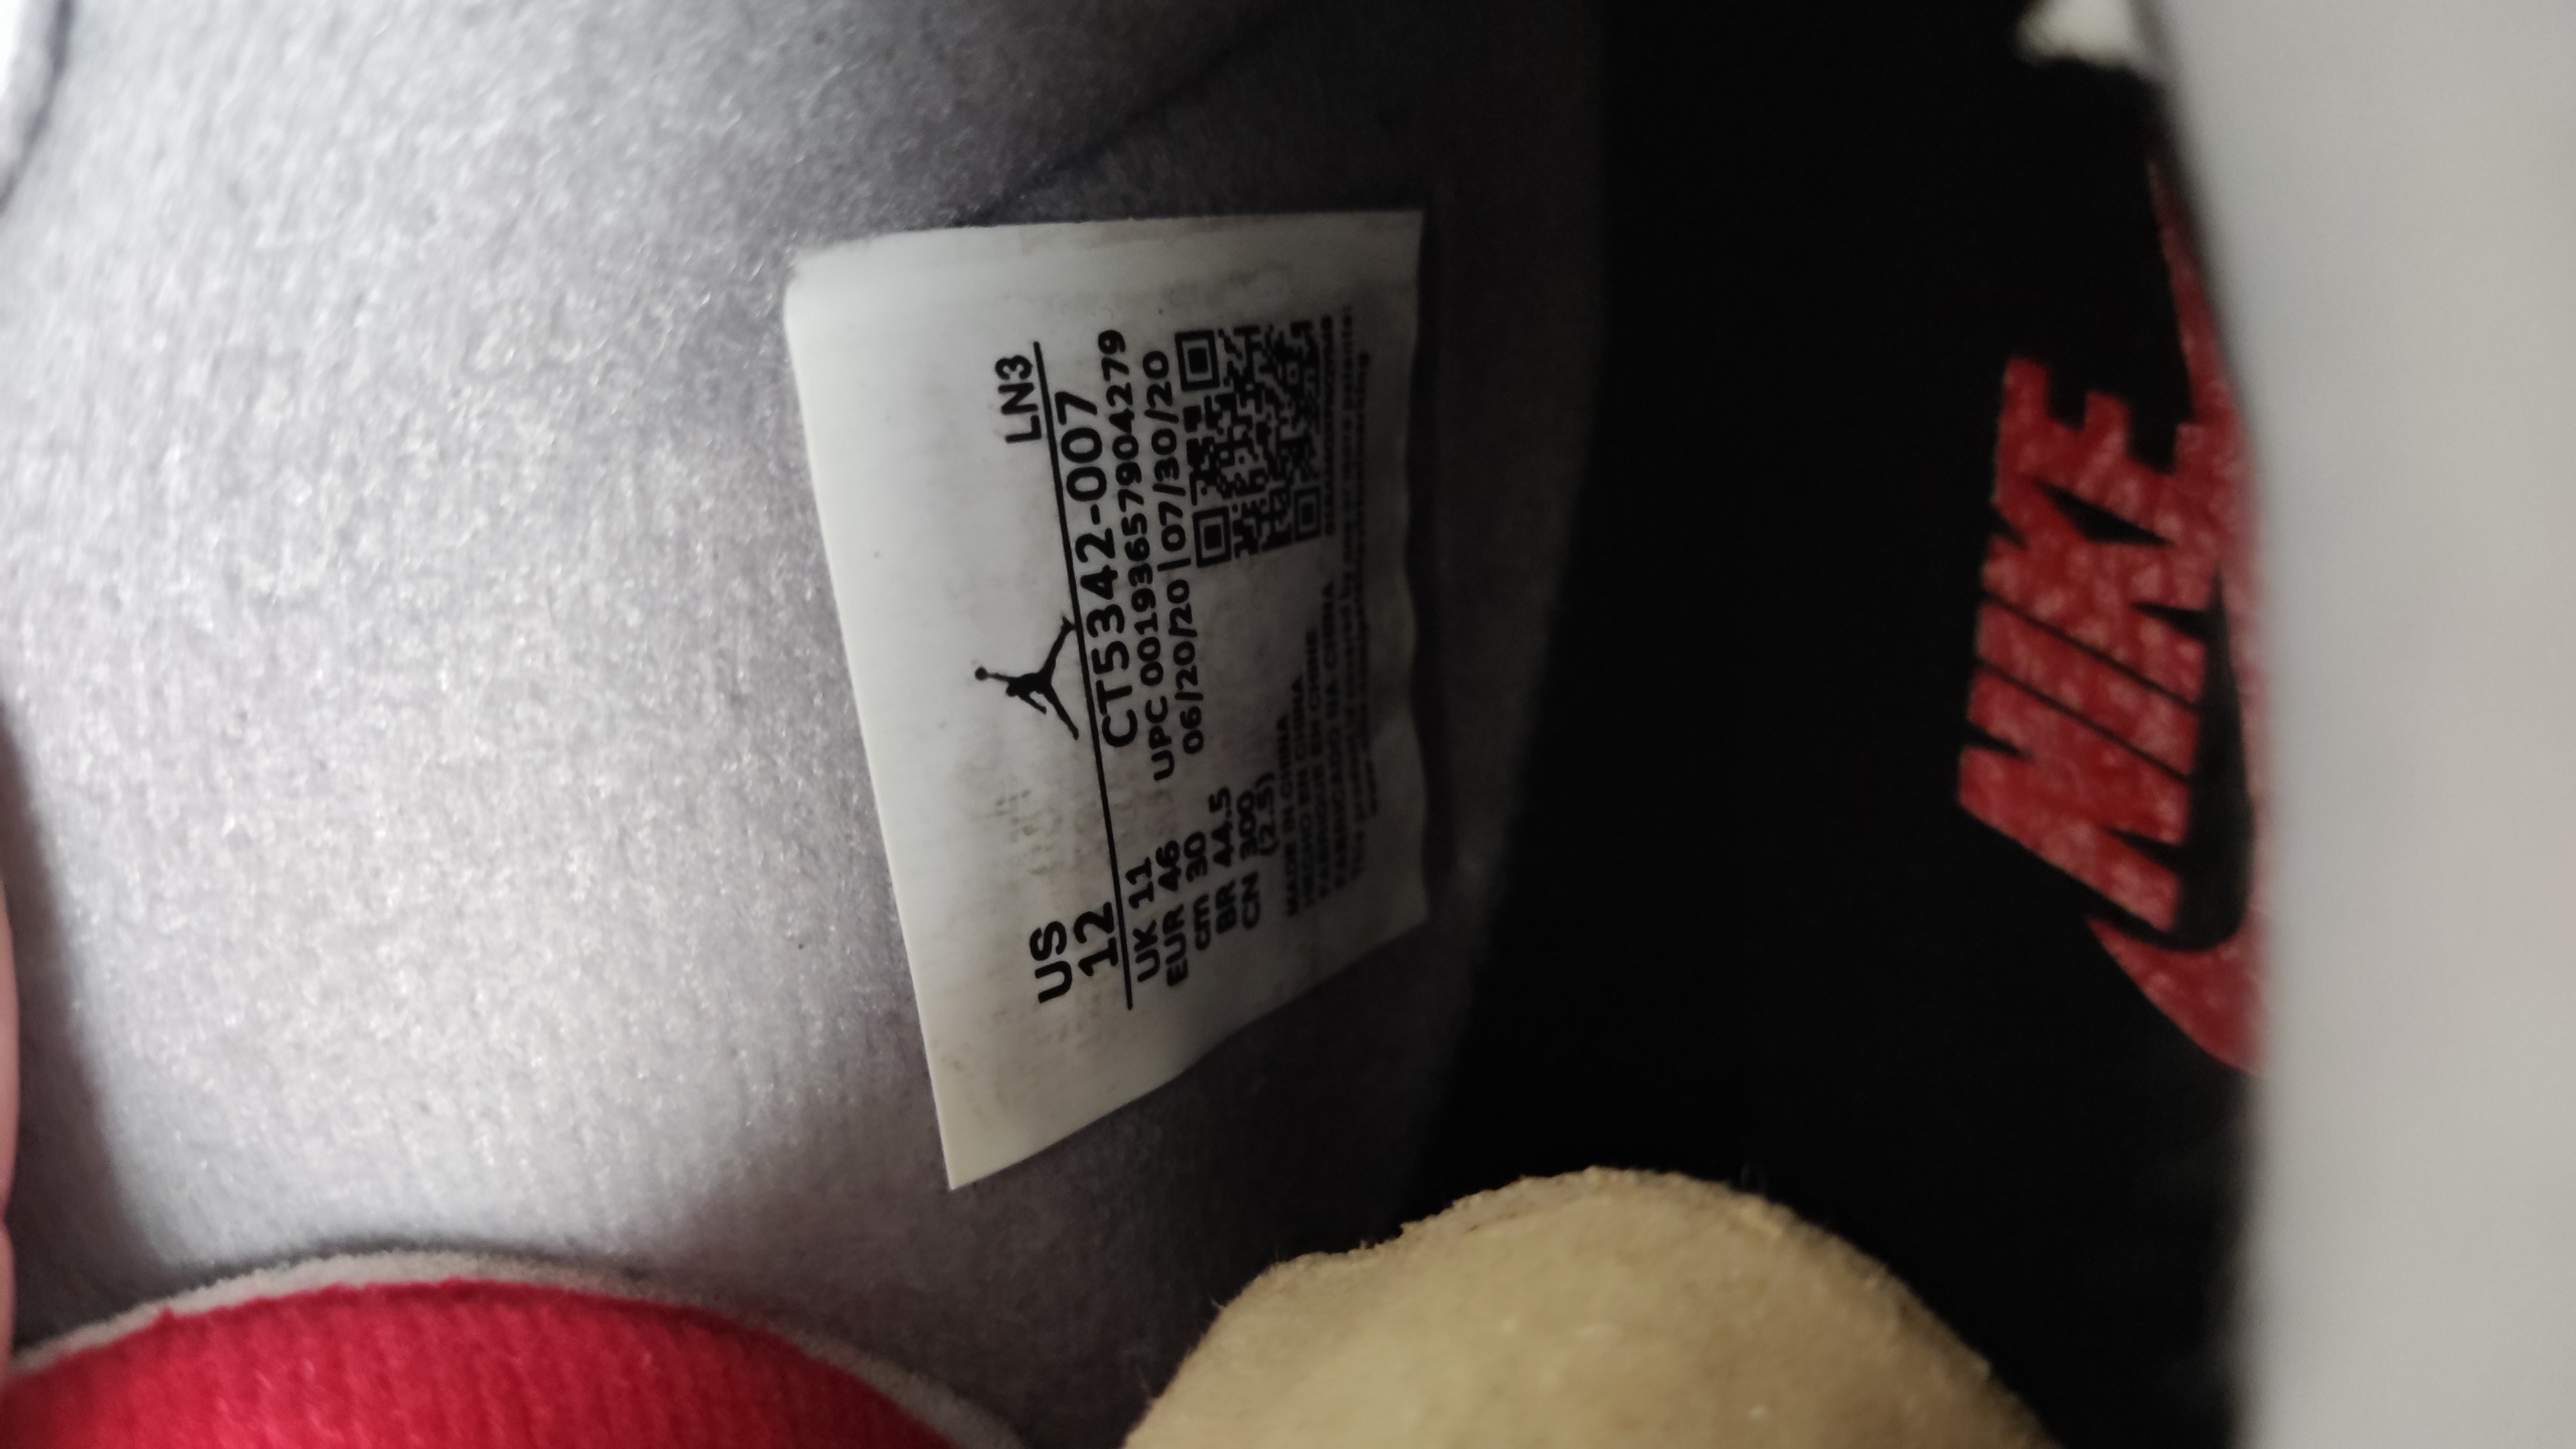 QC Picture Replica Jordan 4 OFF White Bred From Jdfoot